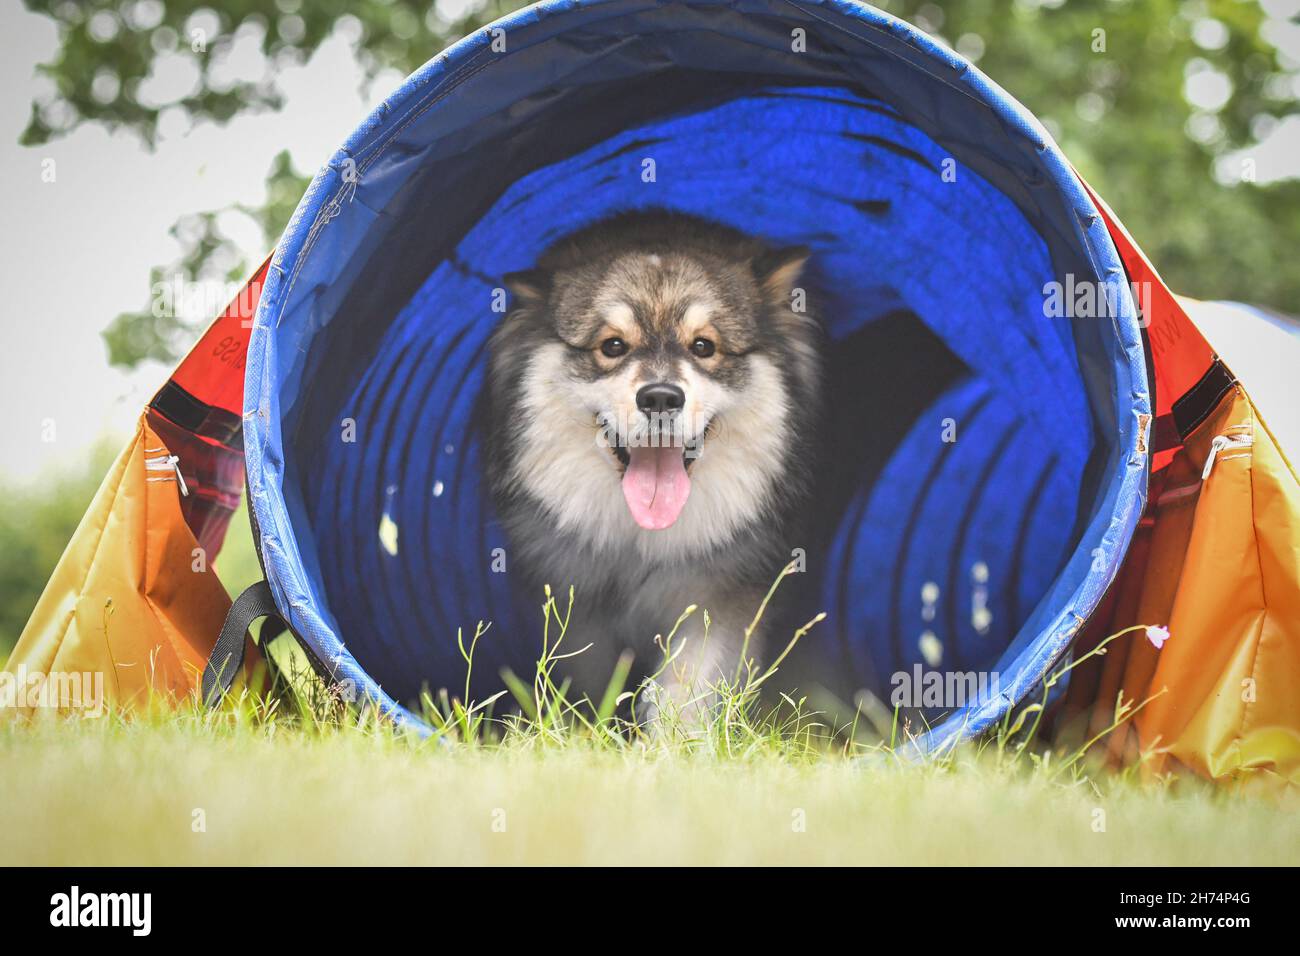 Photo of a Finnish Lapphund dog coming out of a blue tunnel in agility course, training outdoors Stock Photo